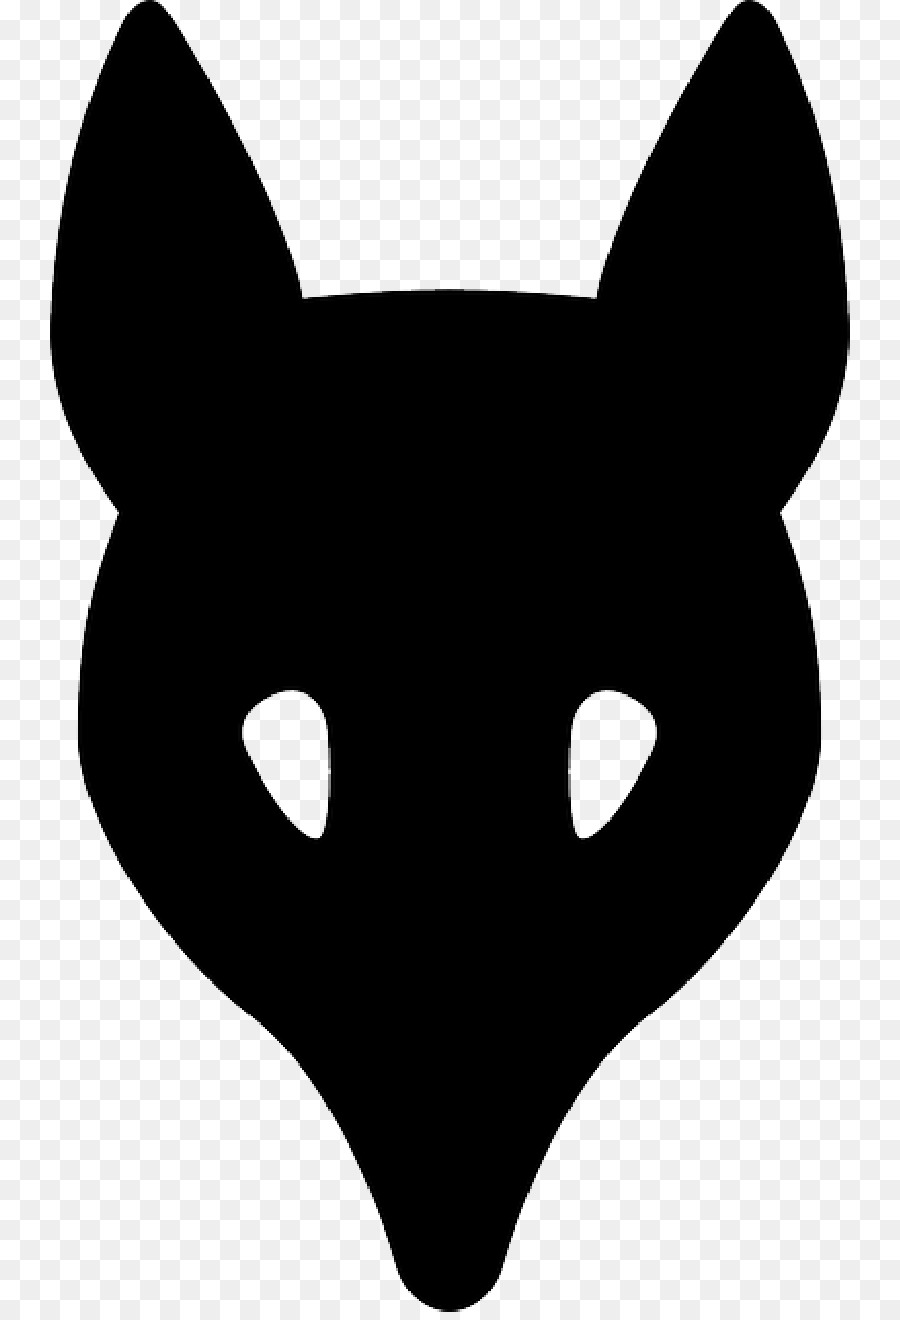 Vector graphics Silhouette Clip art Illustration Fox - deer head silhouette png download - 800*1312 - Free Transparent Silhouette png Download.